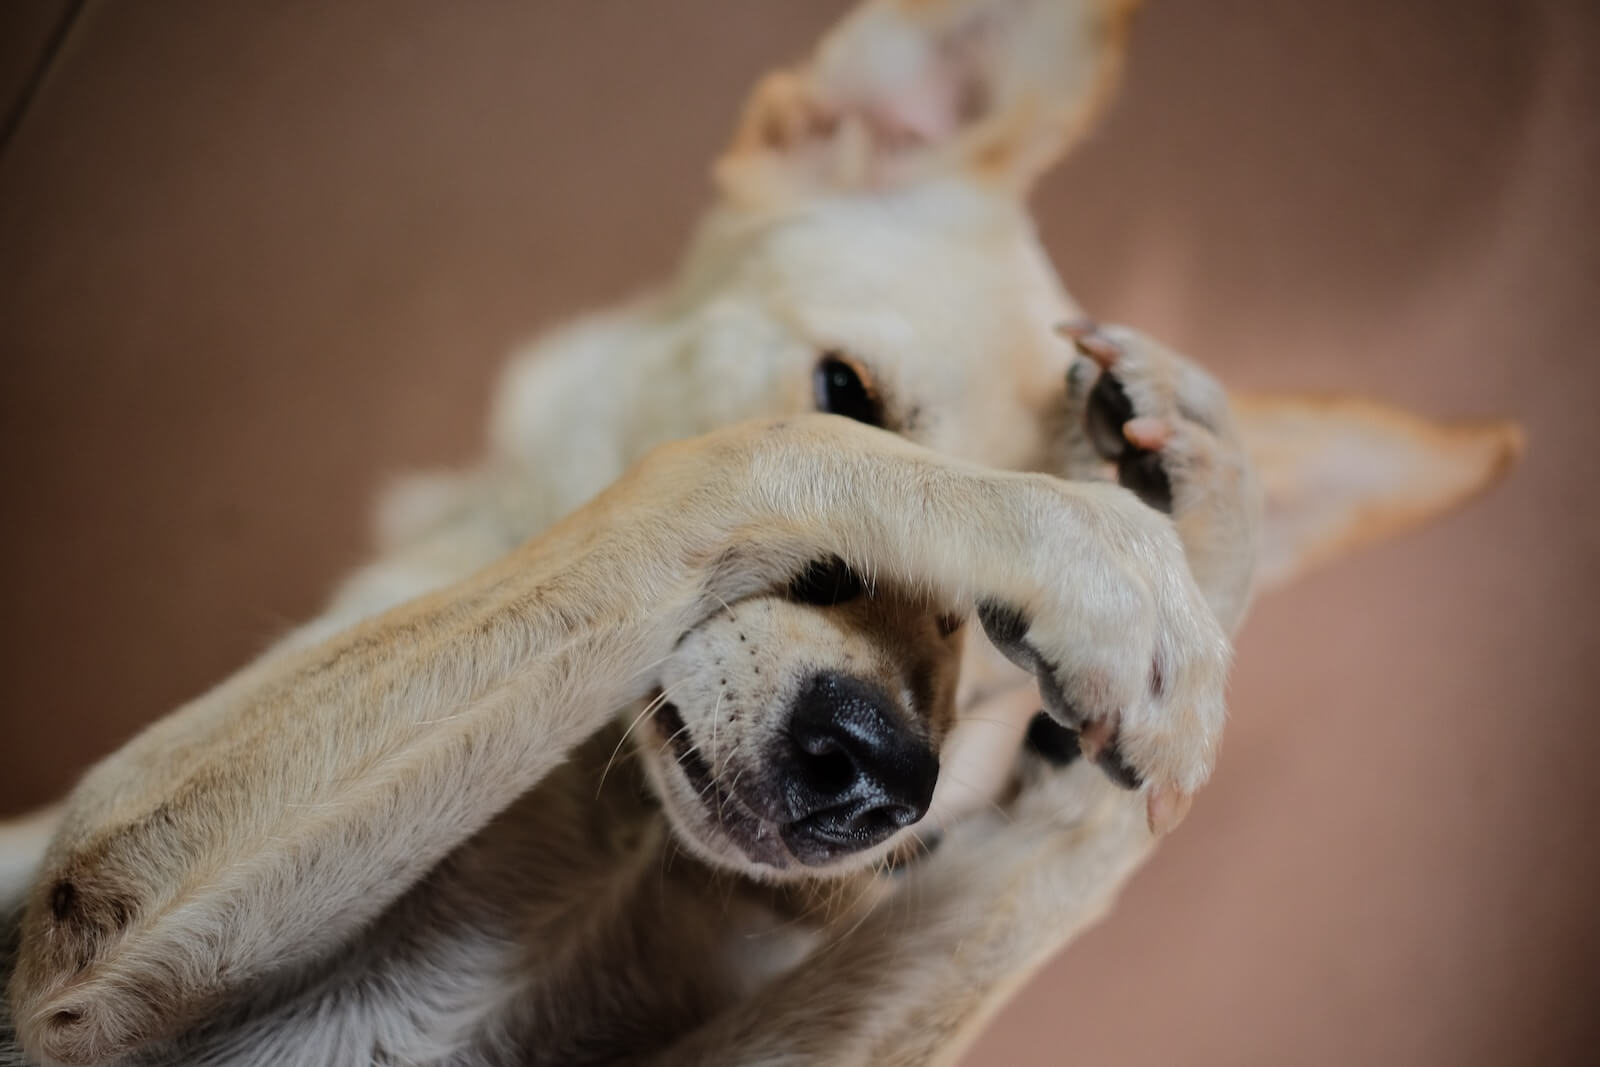 Shy dog covering her face photo by DACHENGZI LIANG on Unsplash